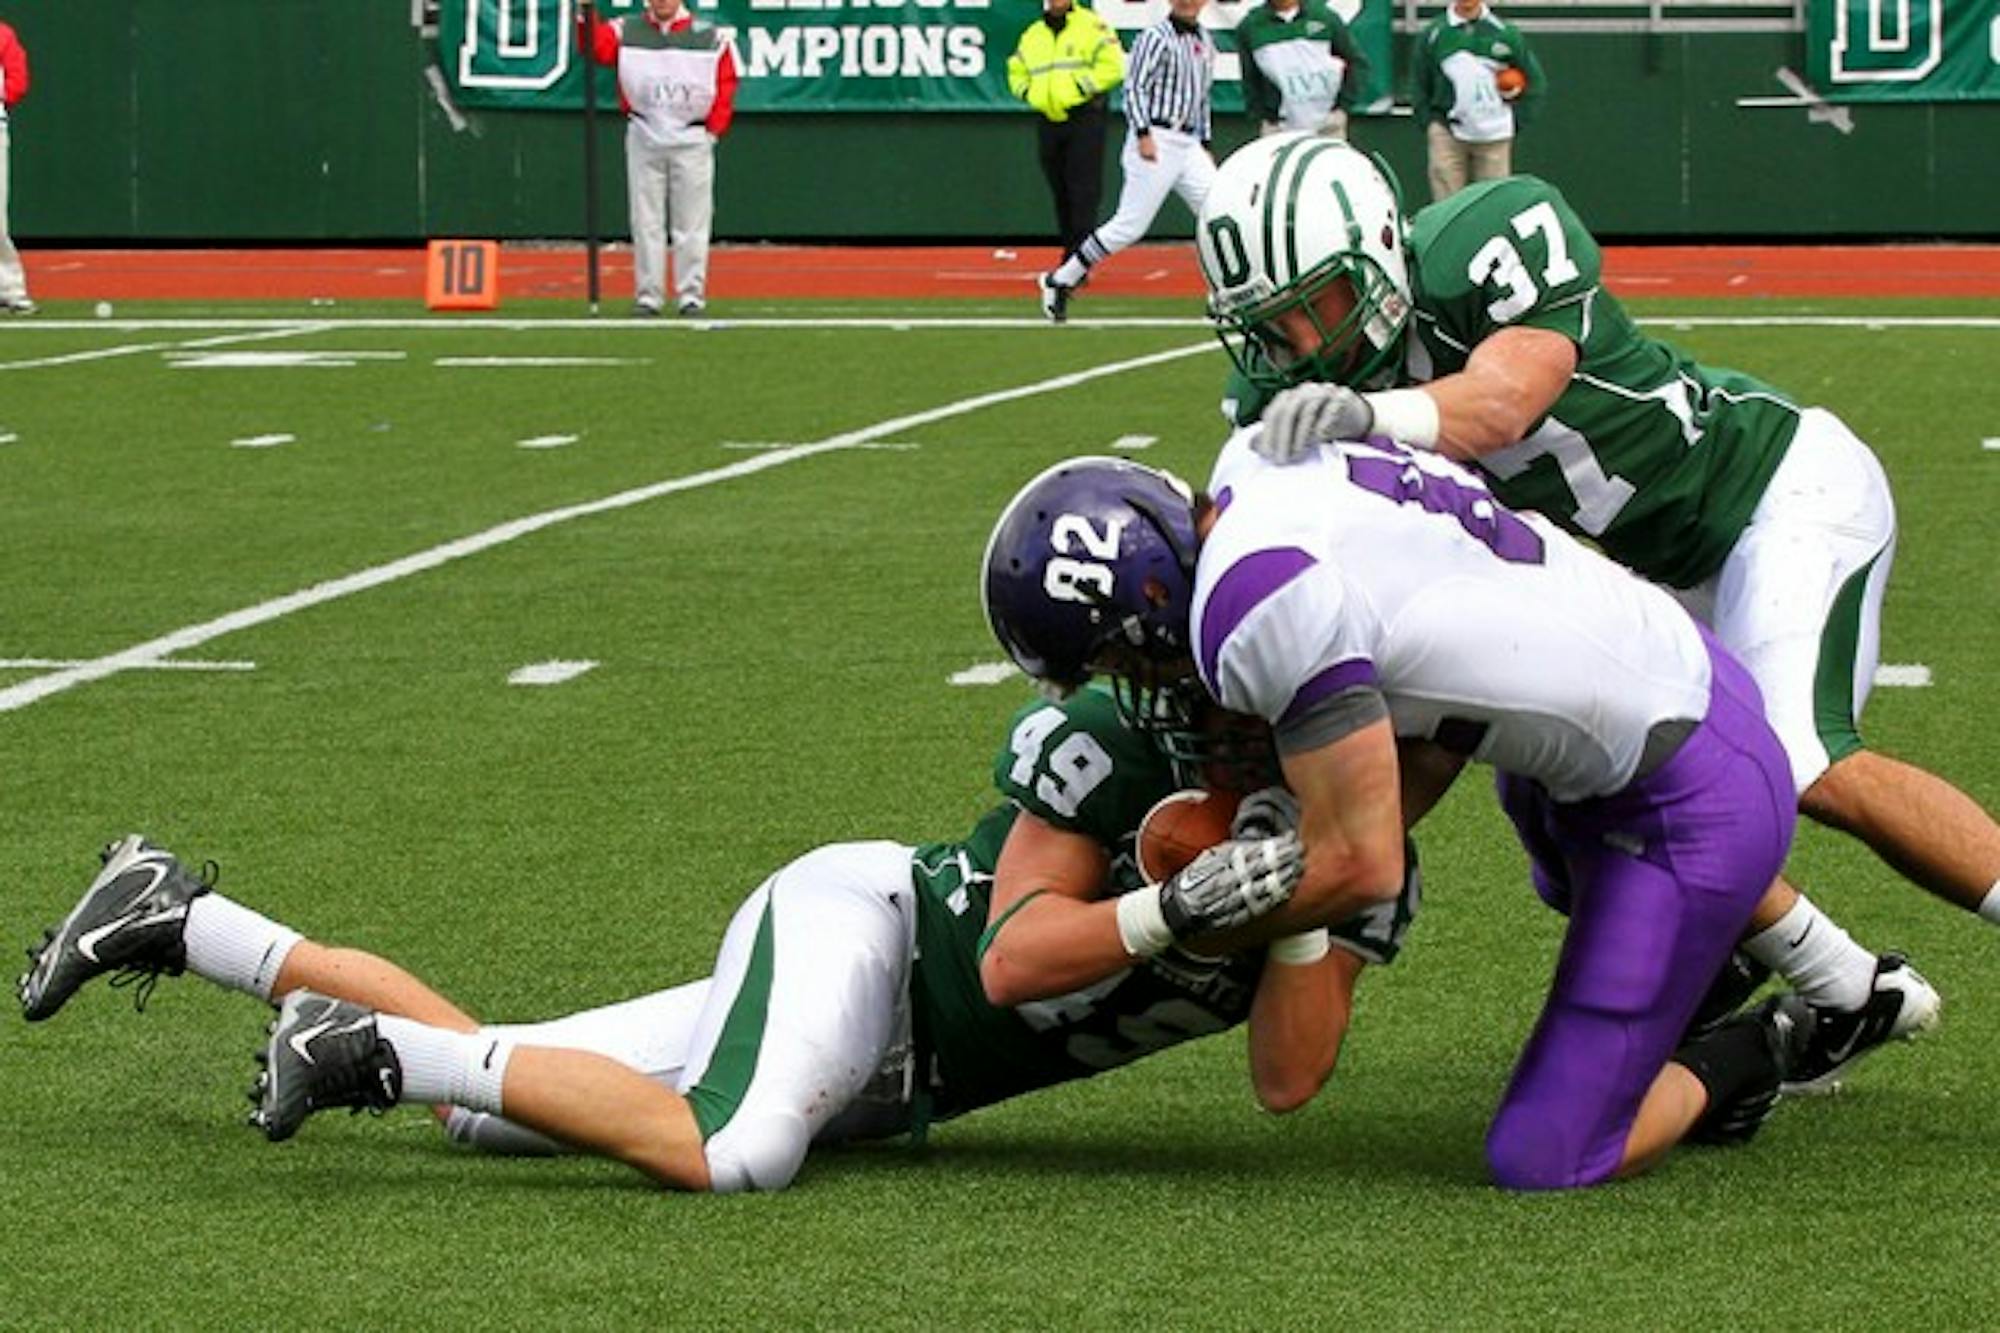 The Big Green turned over the ball three times in the first half of the game against Holy Cross.